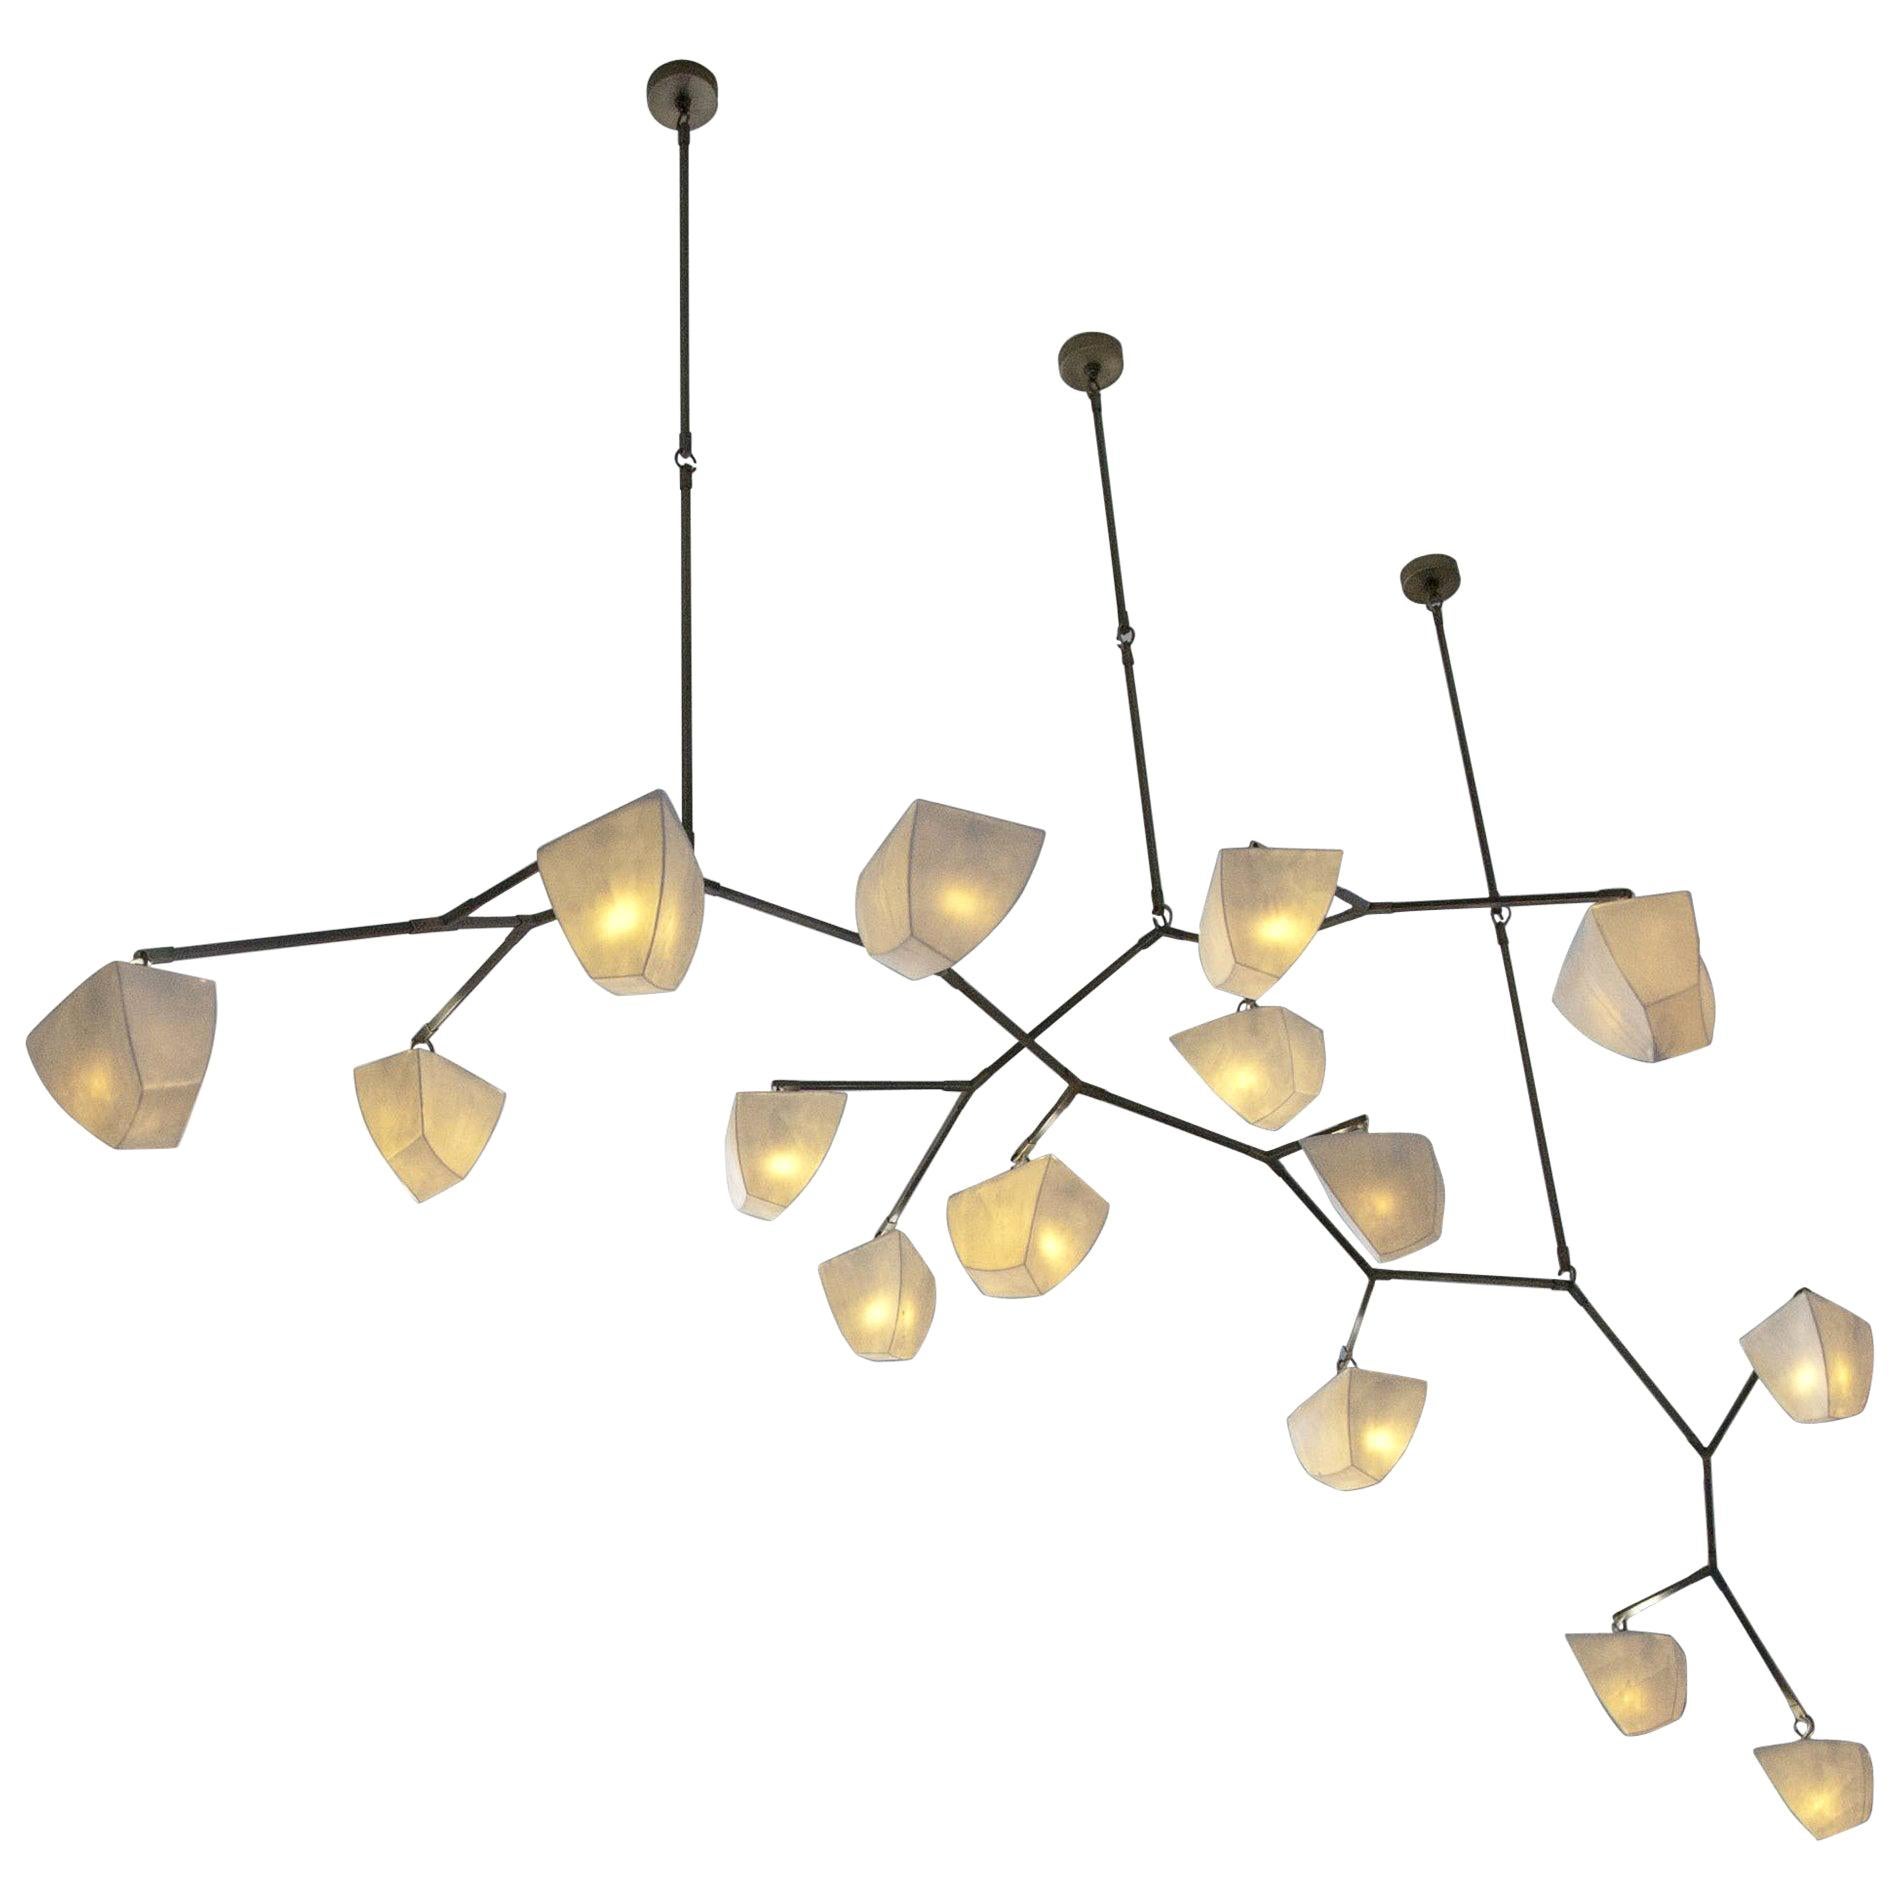 Porcelain Cassiopeia 15: Three Stem Chandelier, handmade by Andrea Claire Studio